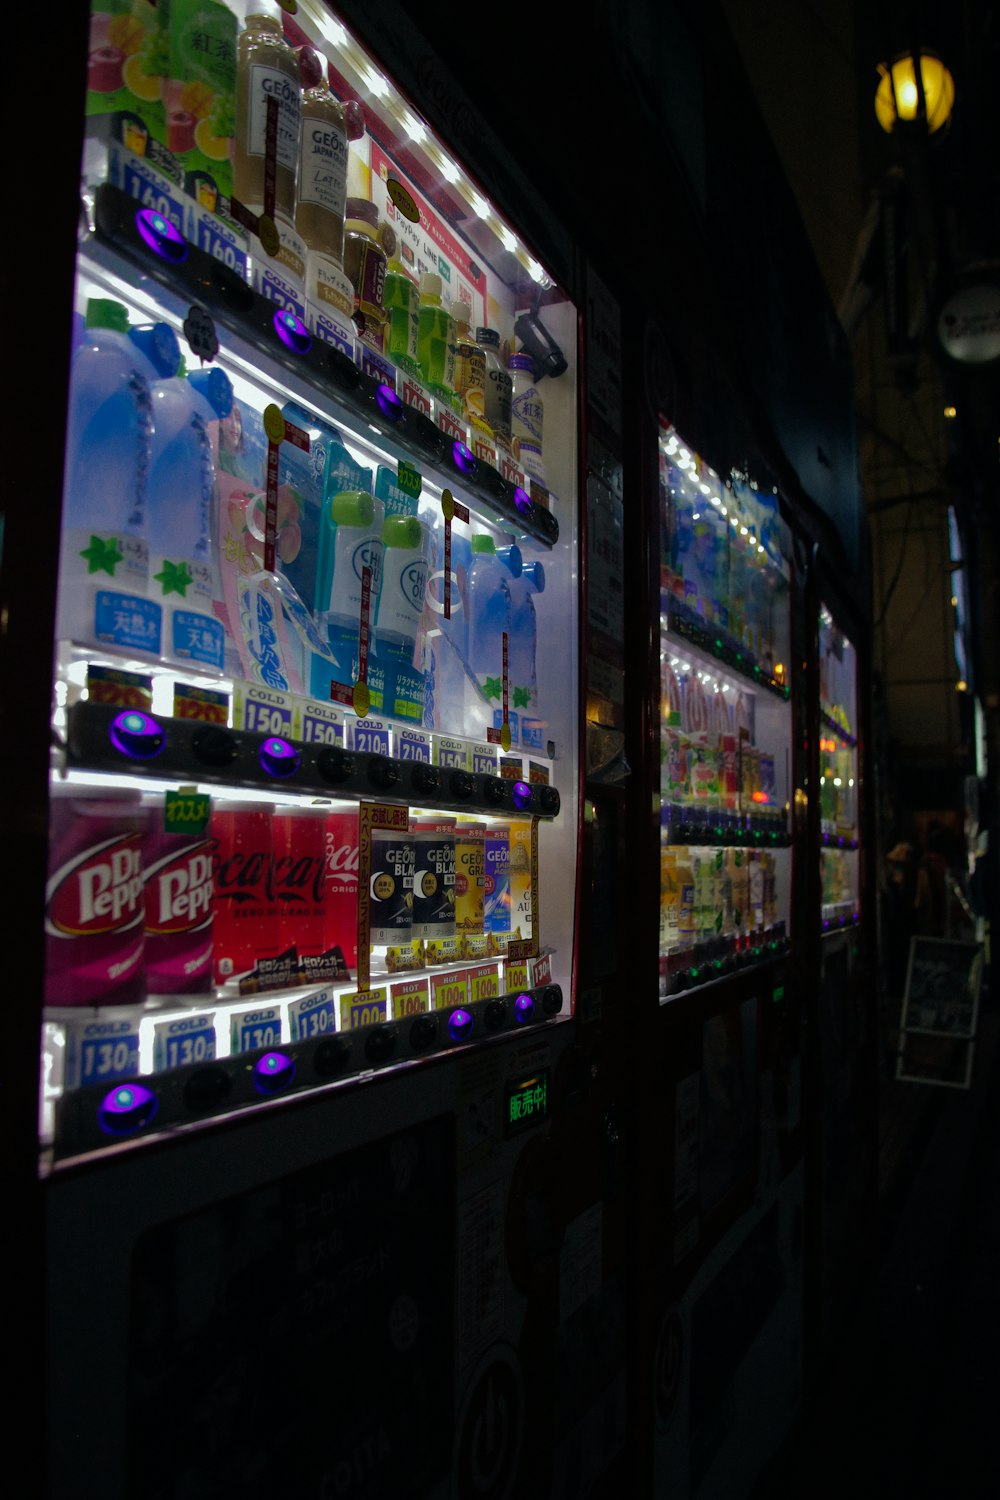 a vending machine is lit up at night